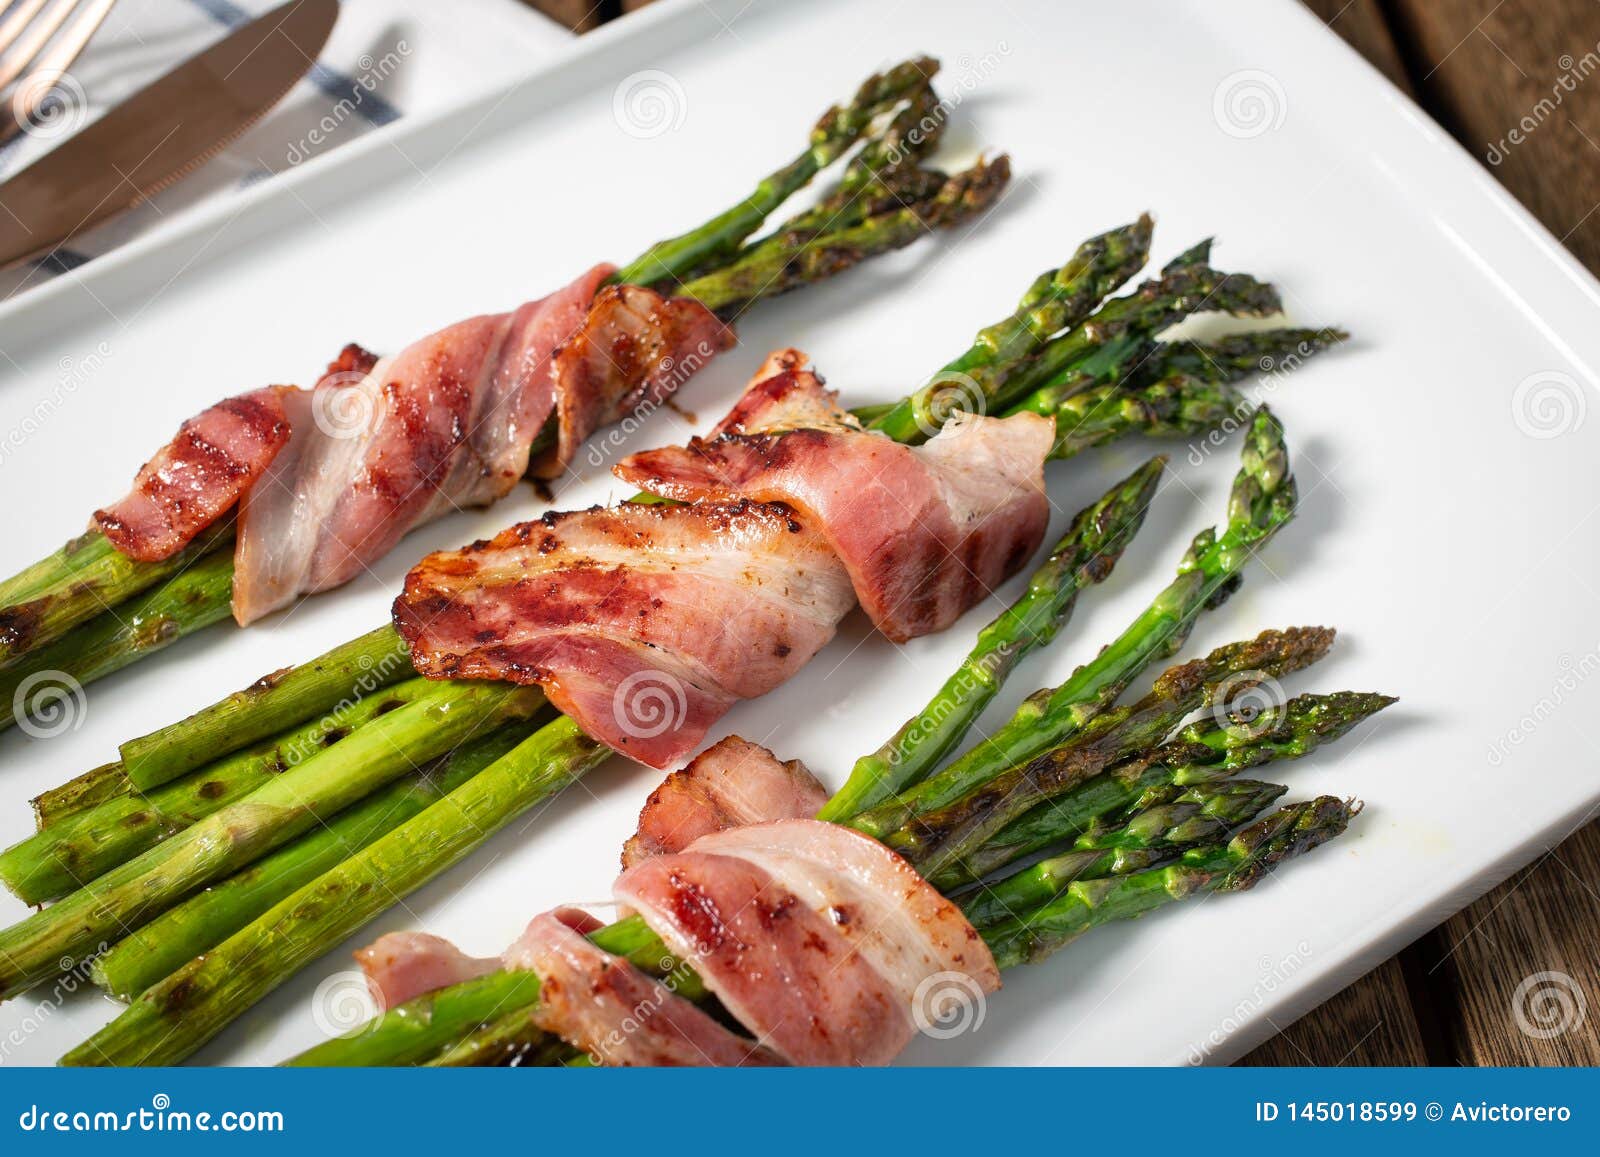 cooked asparagus with wrapped bacon on plate